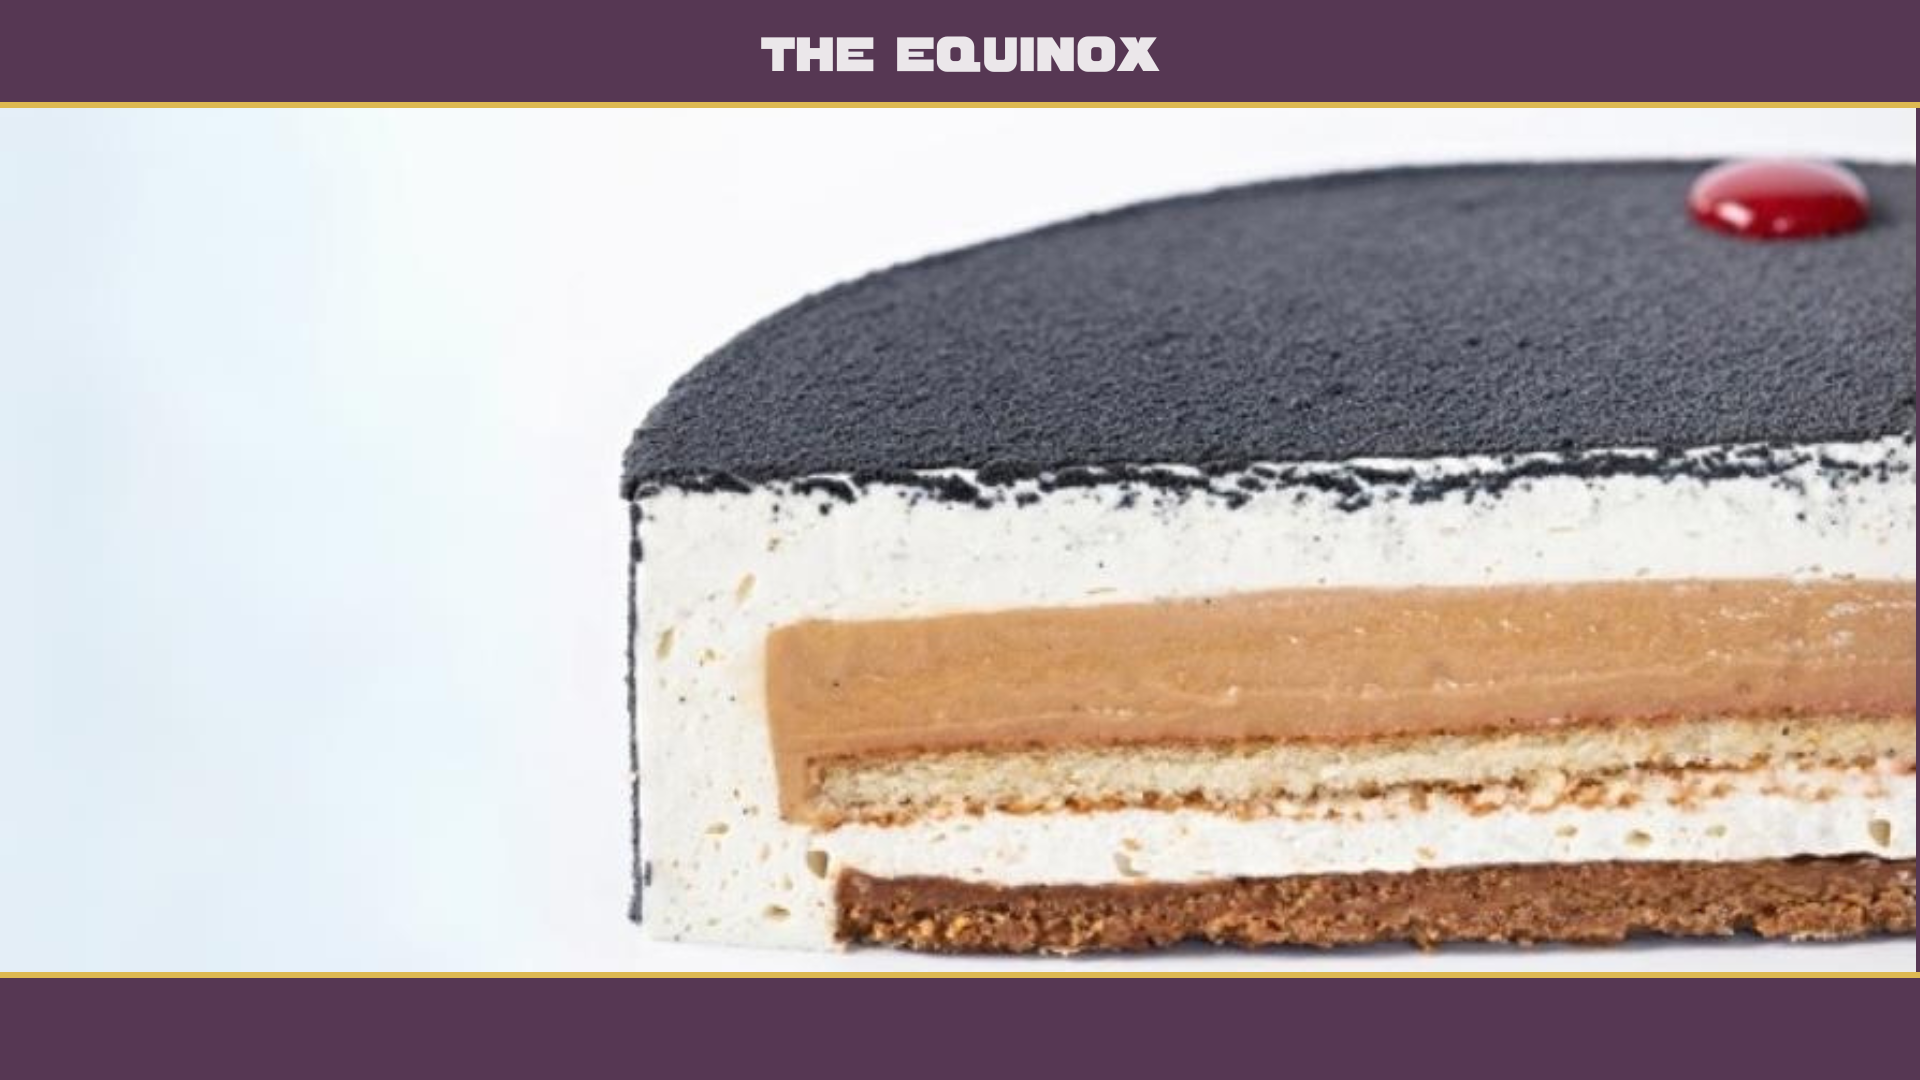 An Equinox pastry split in half to showcase the biscuit, caramel center